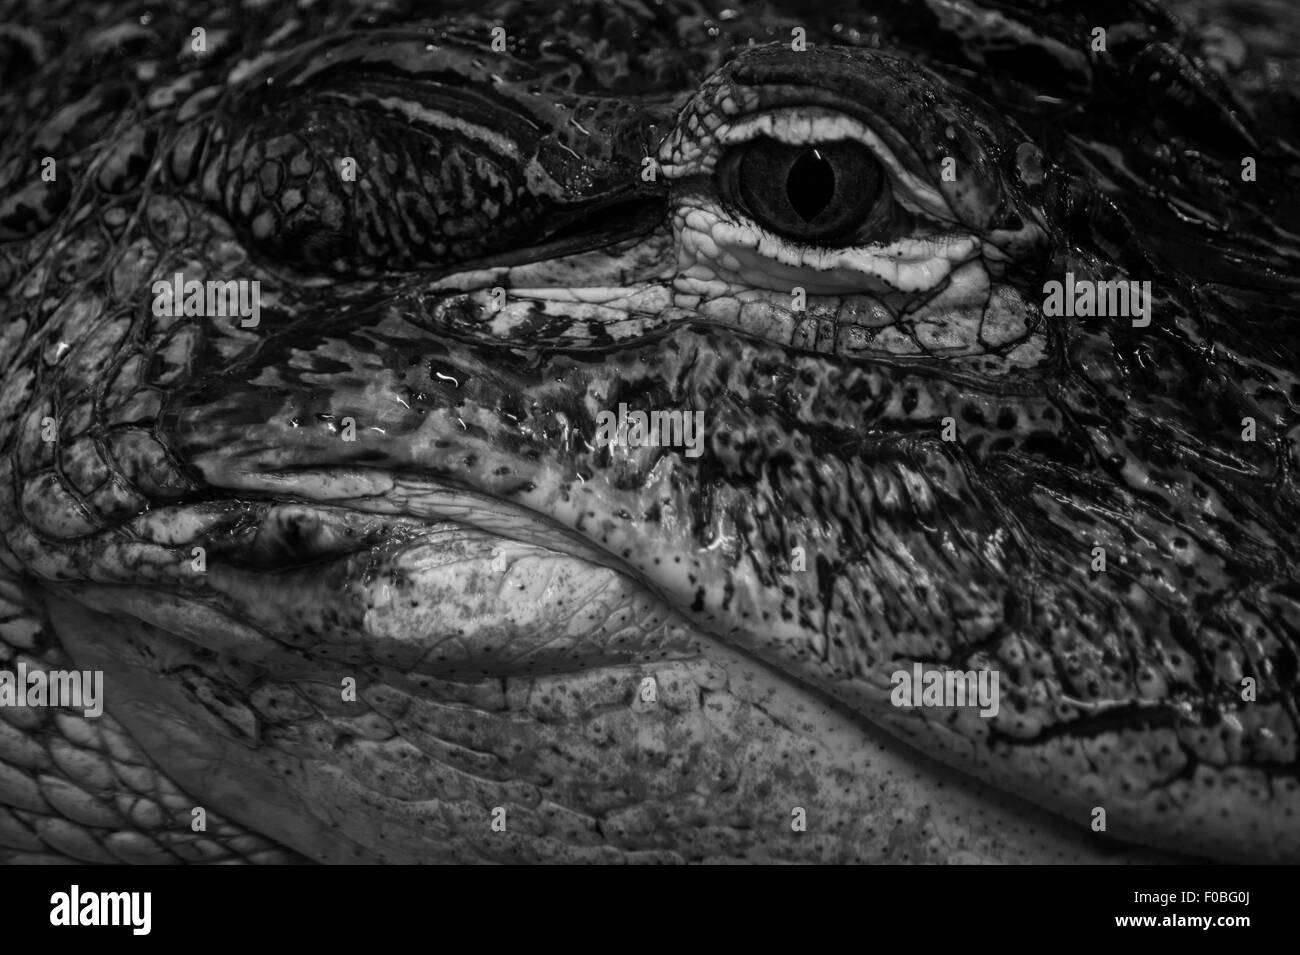 Close-up of  alligator's eye at Reptile zoo Stock Photo